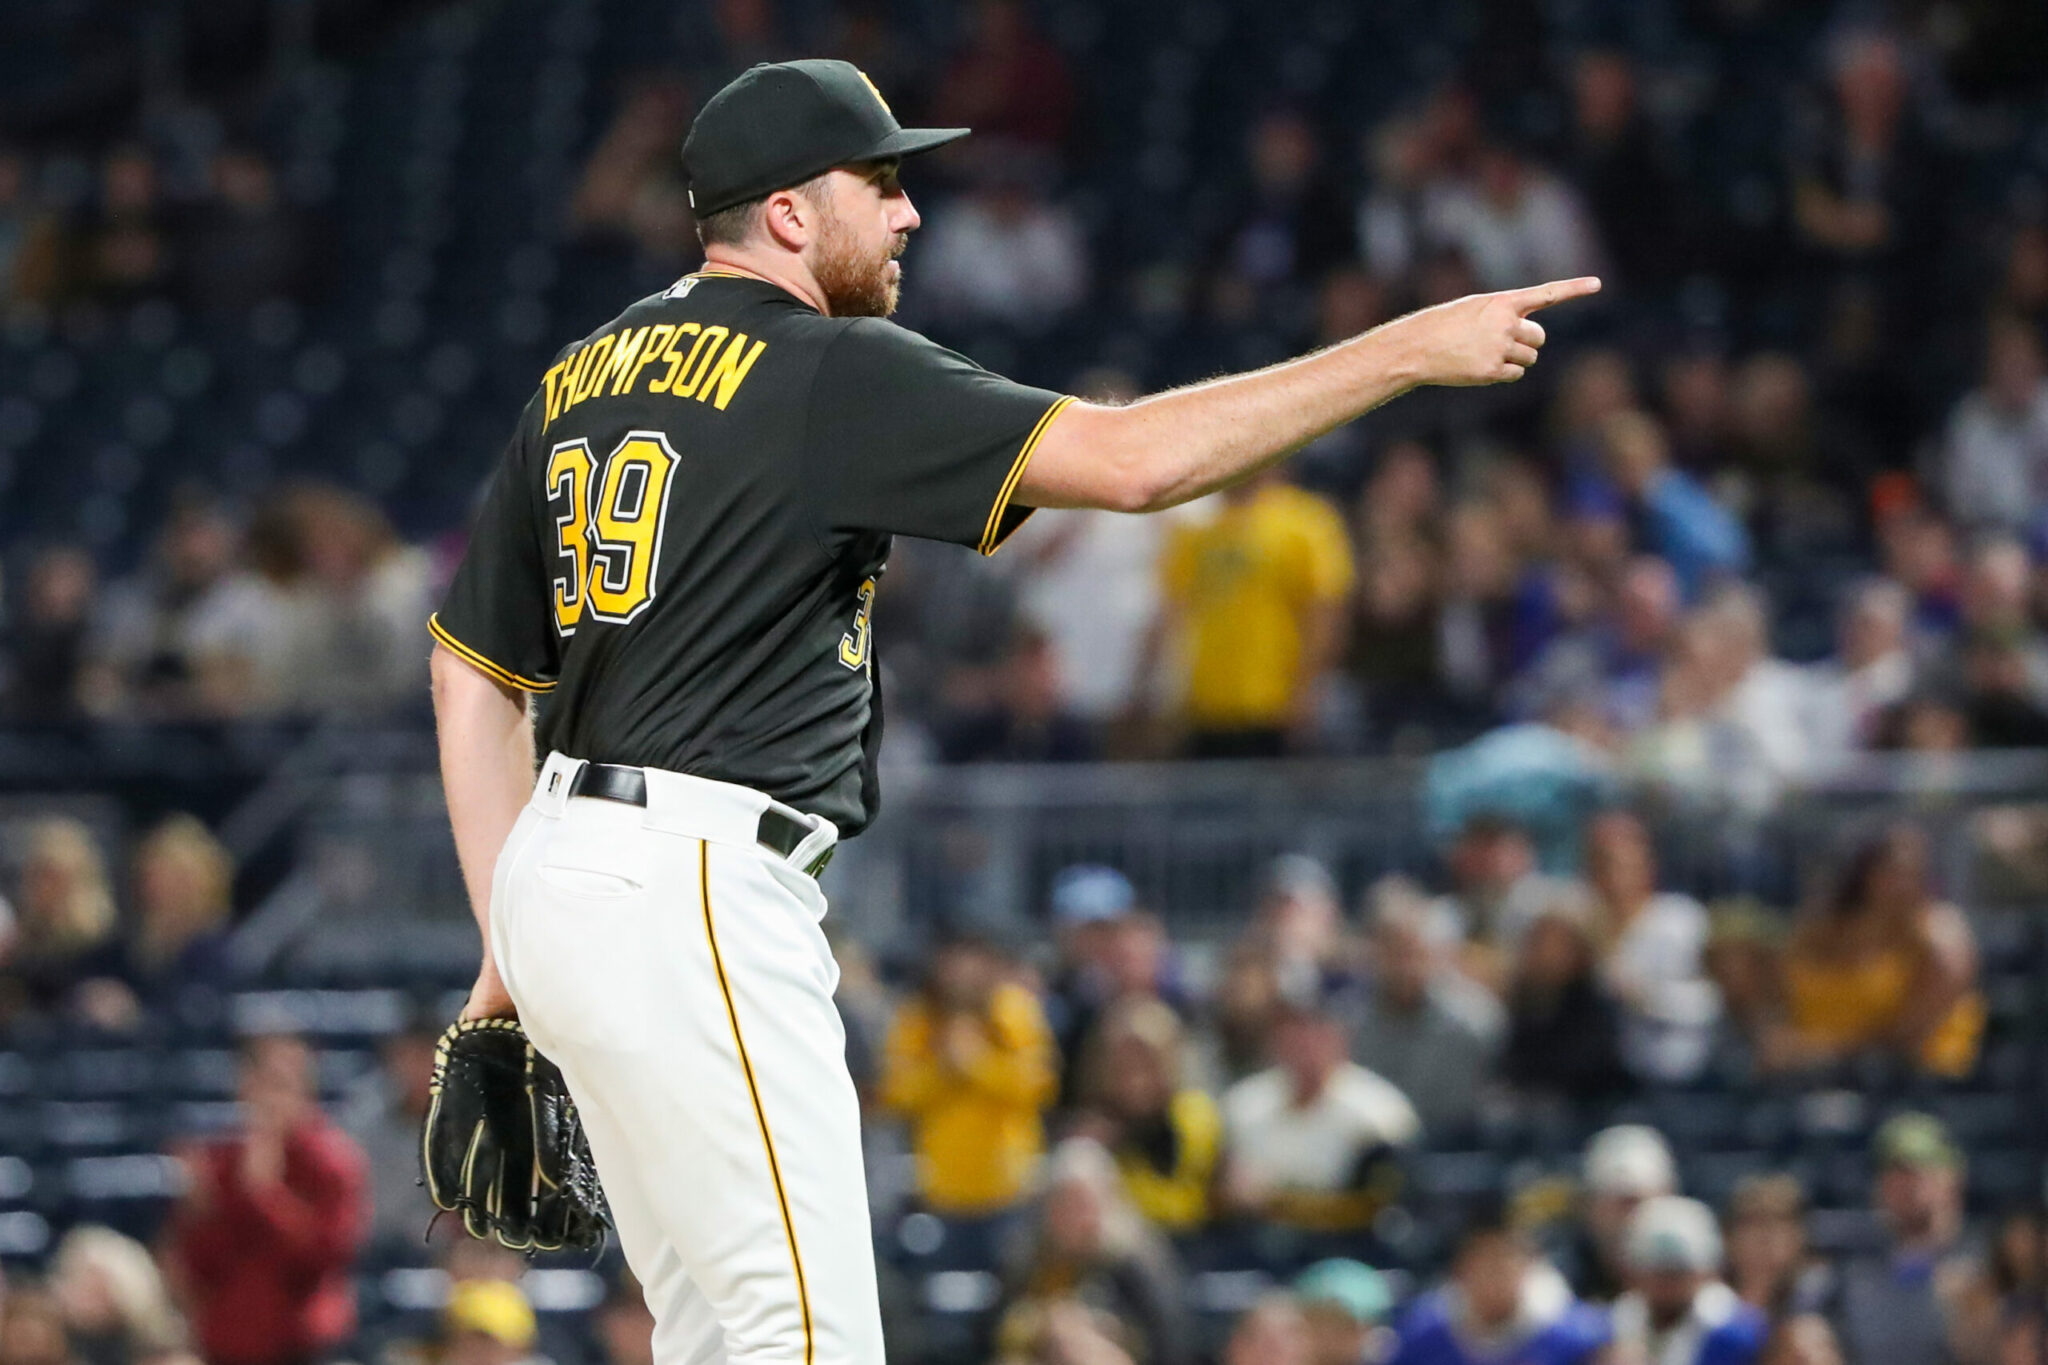 The Pirates Announce Rich Hill Signing; Zach Thompson is Designated for Assignment